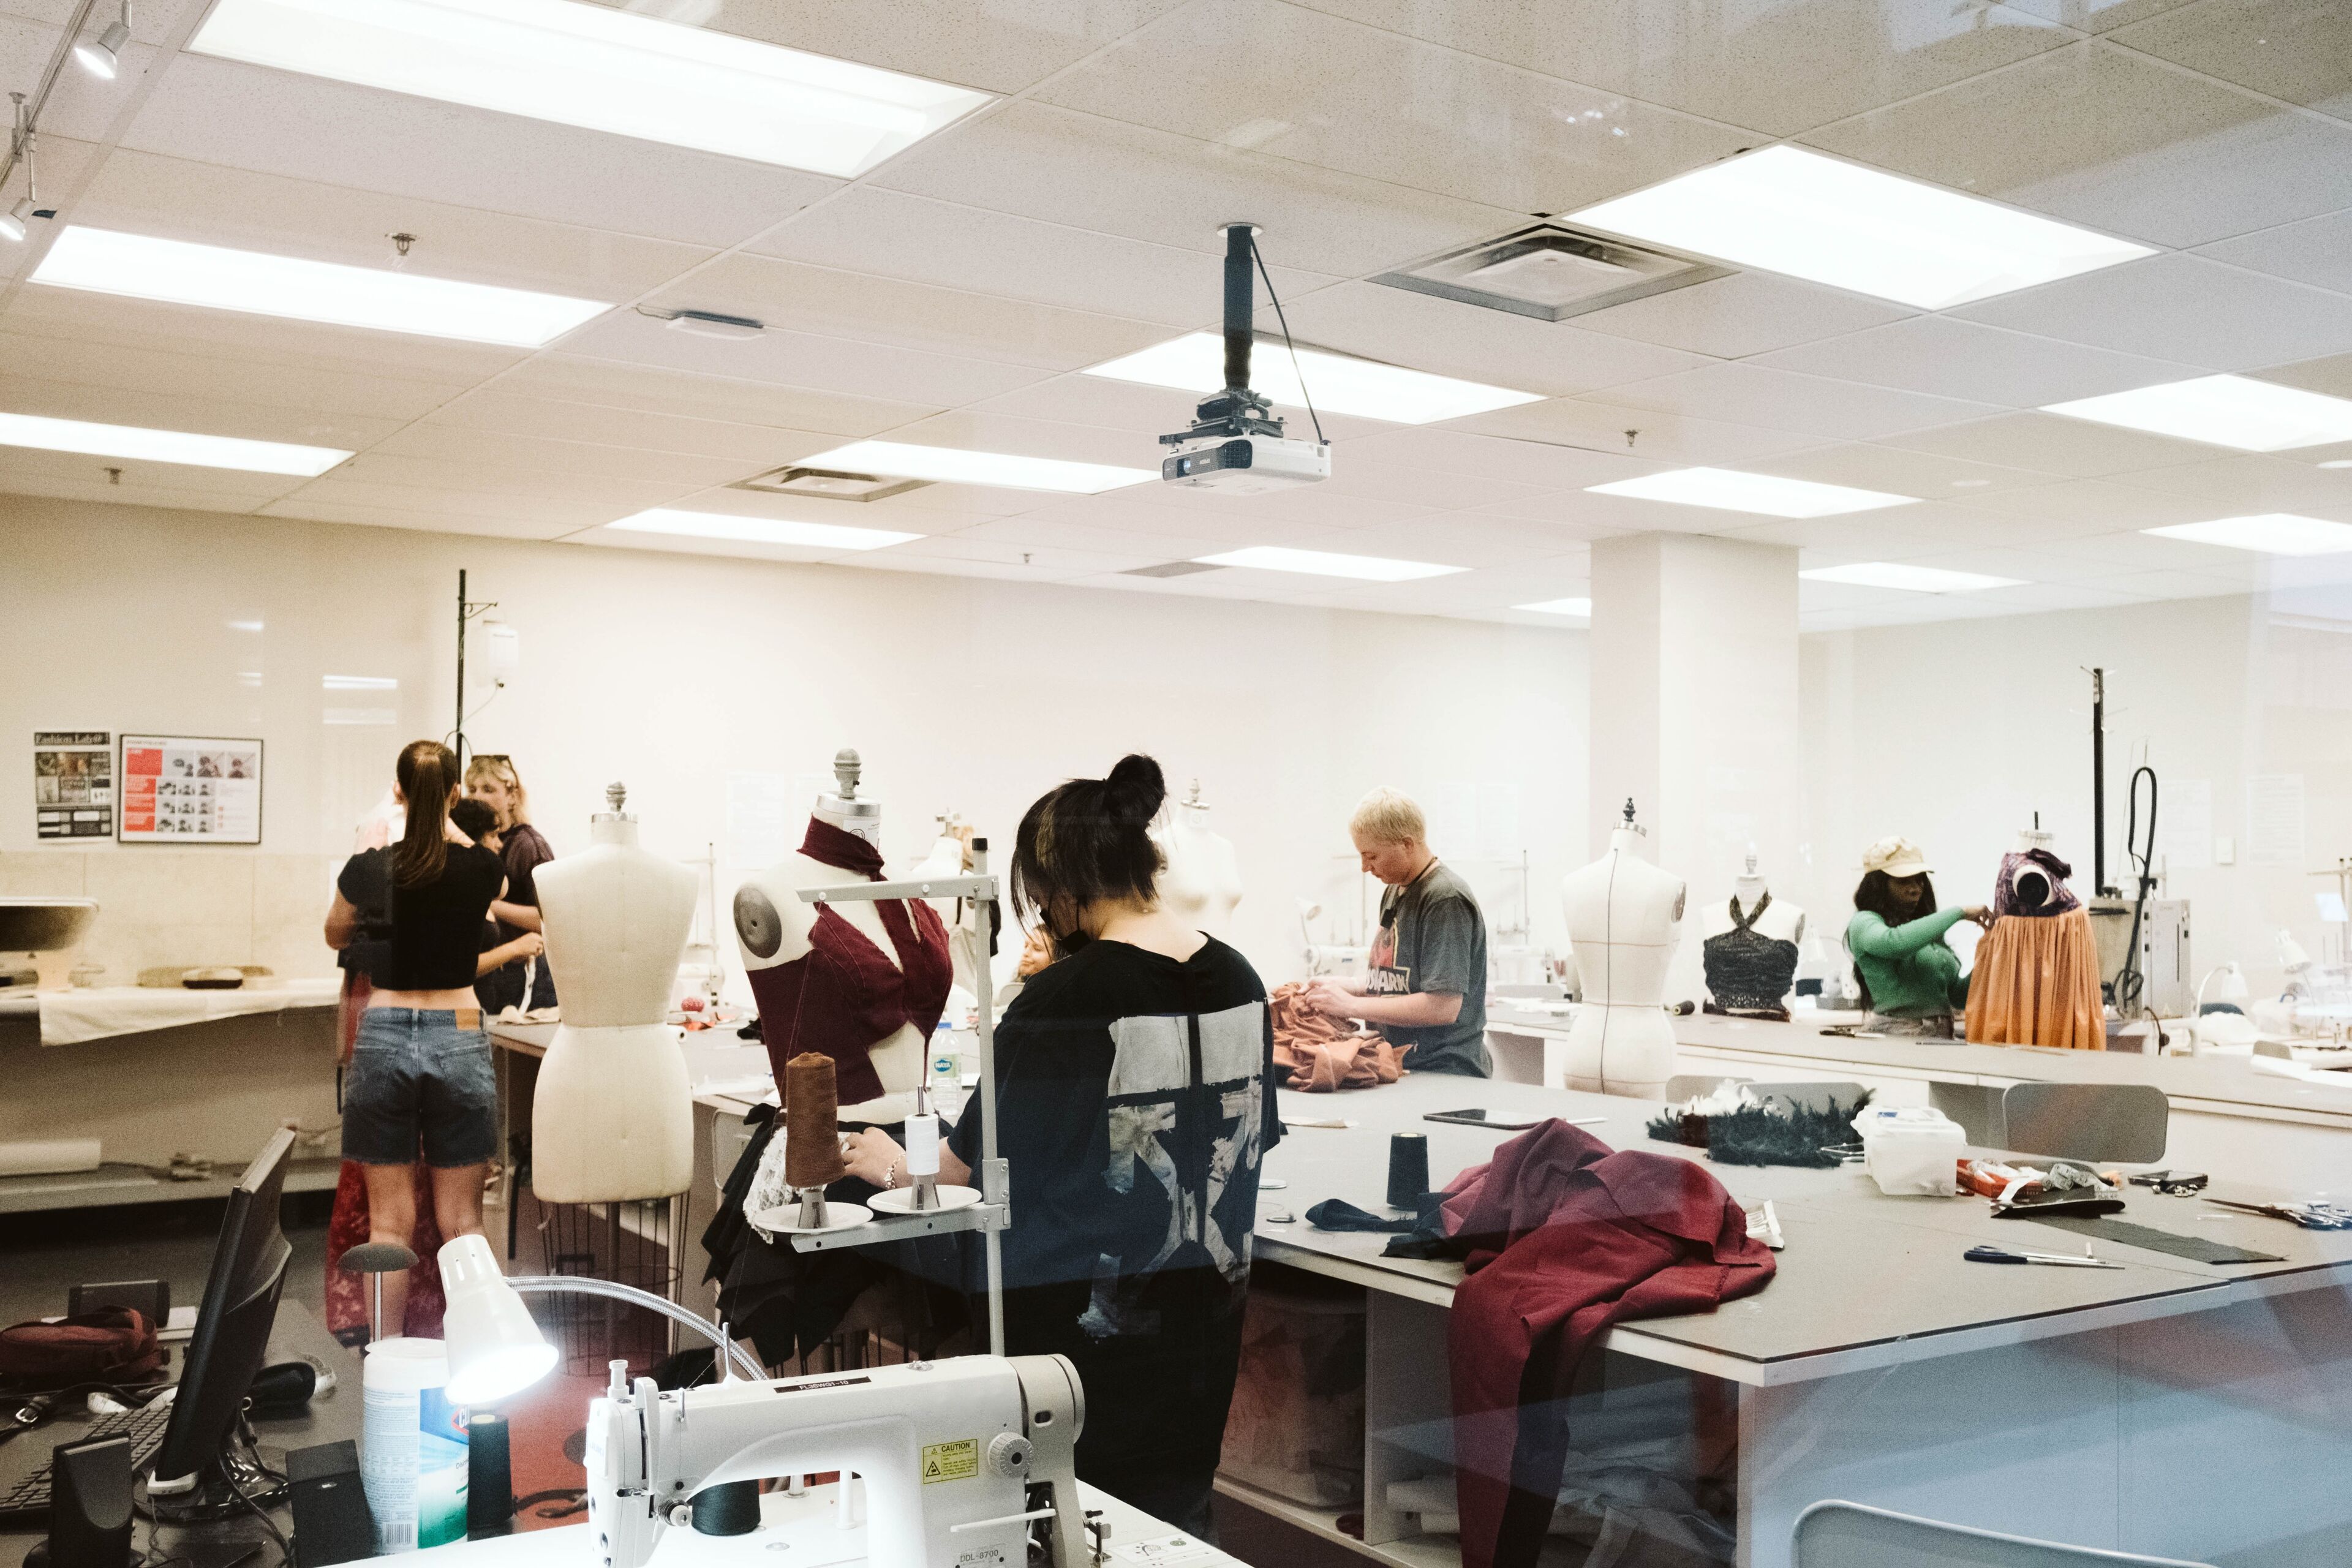 Students and instructors engaged in garment creation in a fashion design studio.